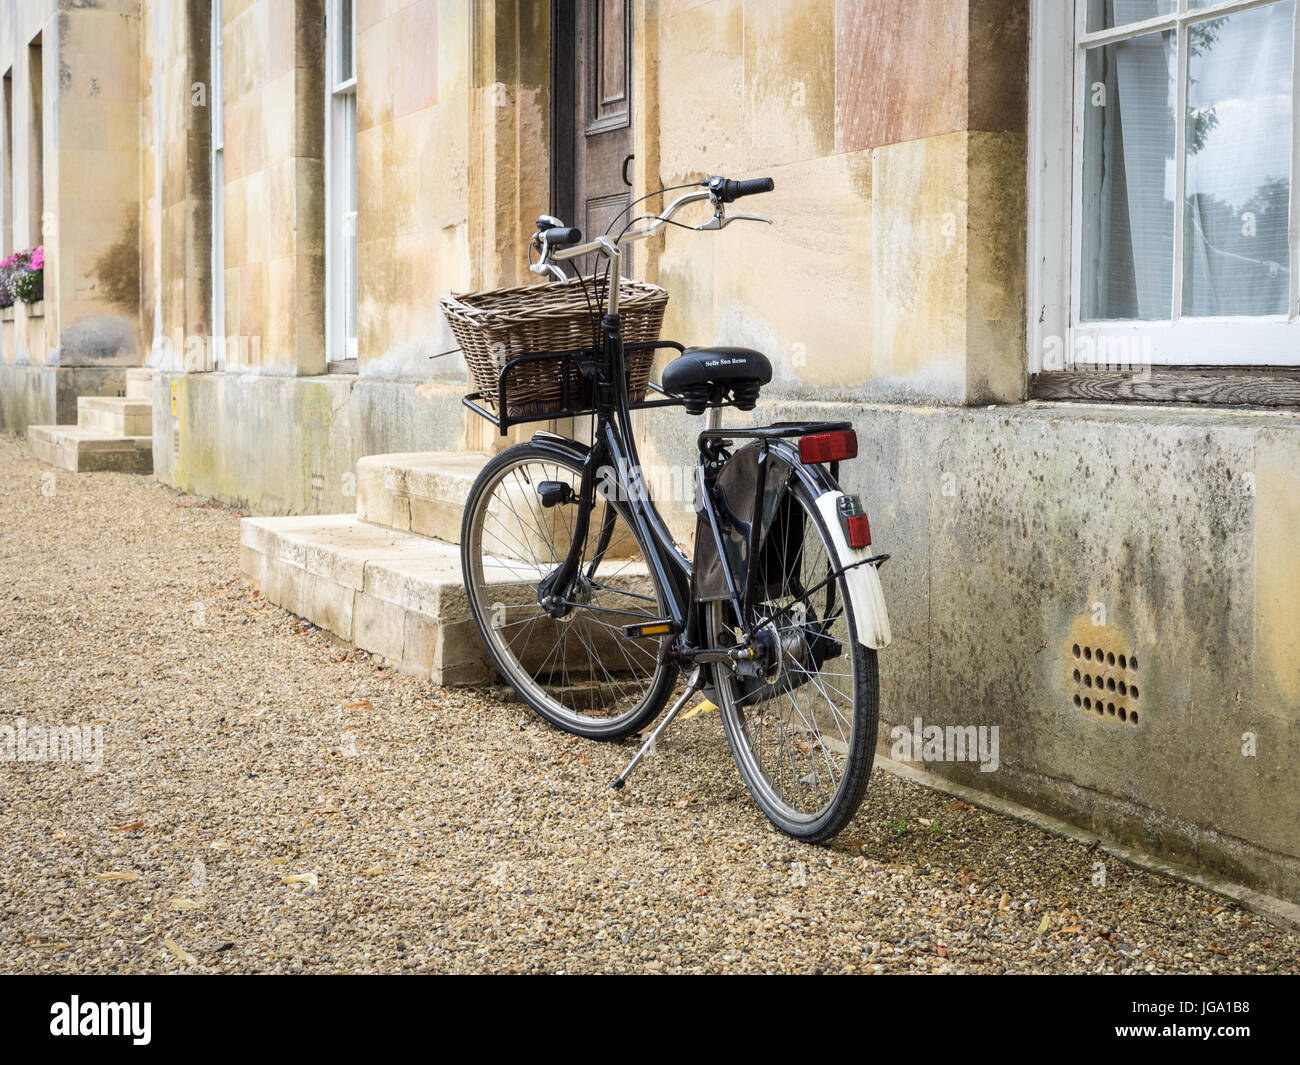 Student Bike outside college buildings at Downing College, part of the University of Cambridge, UK. Downing College was founded in 1800. Stock Photo